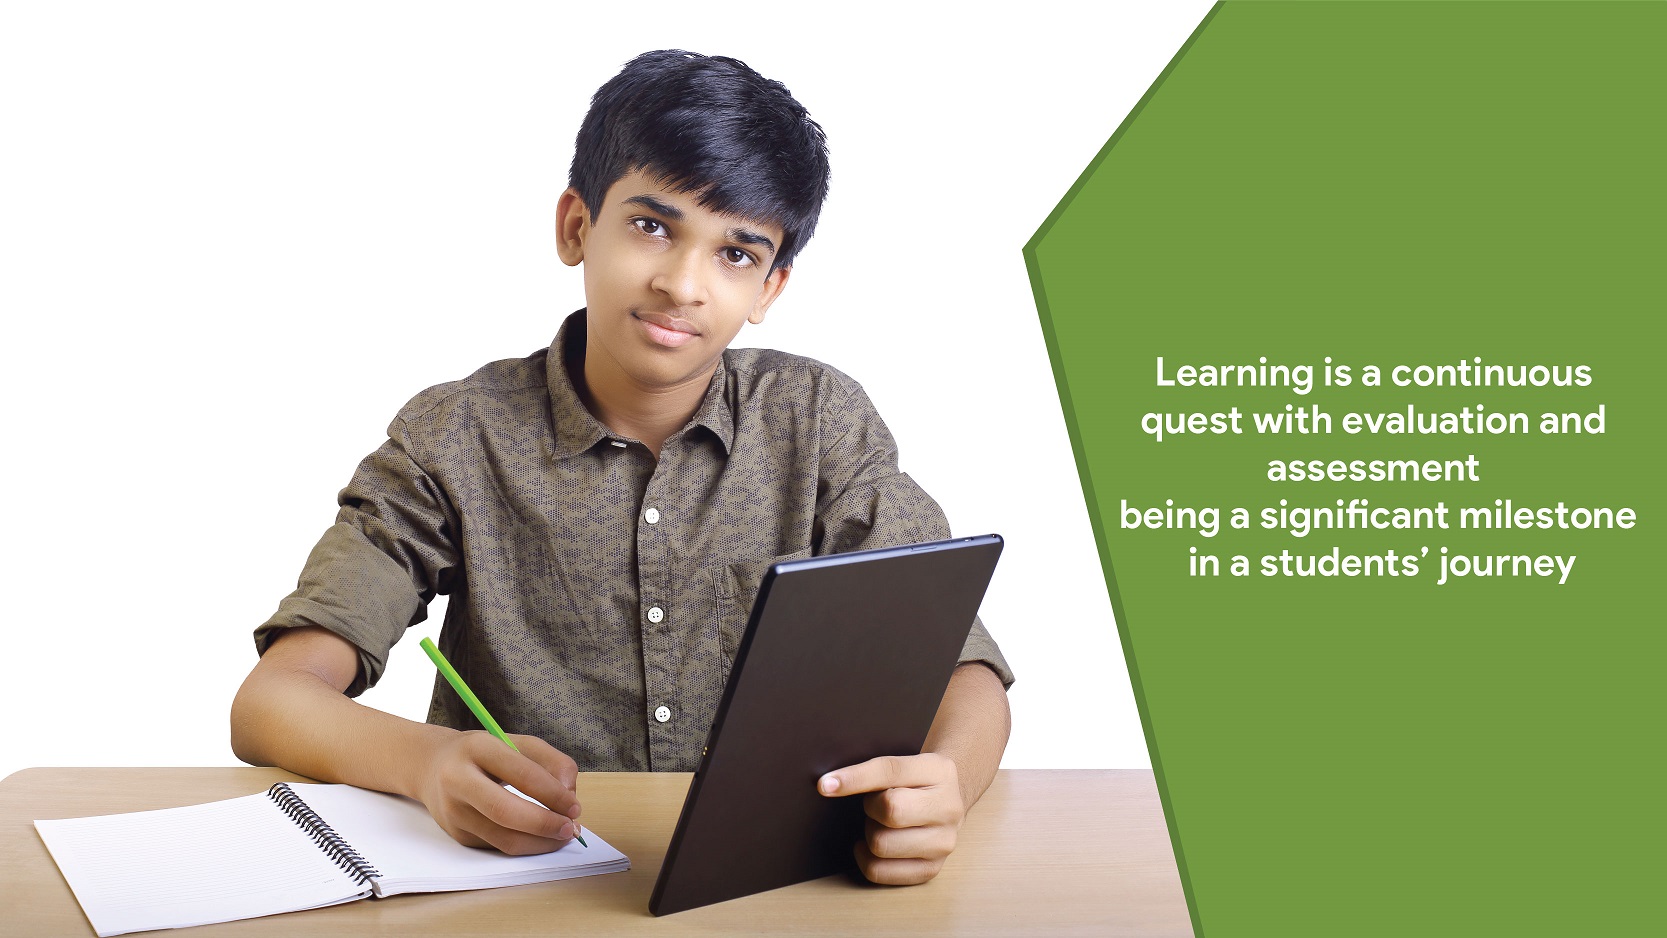 Learning is a continuous quest with evaluation and assessment being a significant milestone in a students’ journey